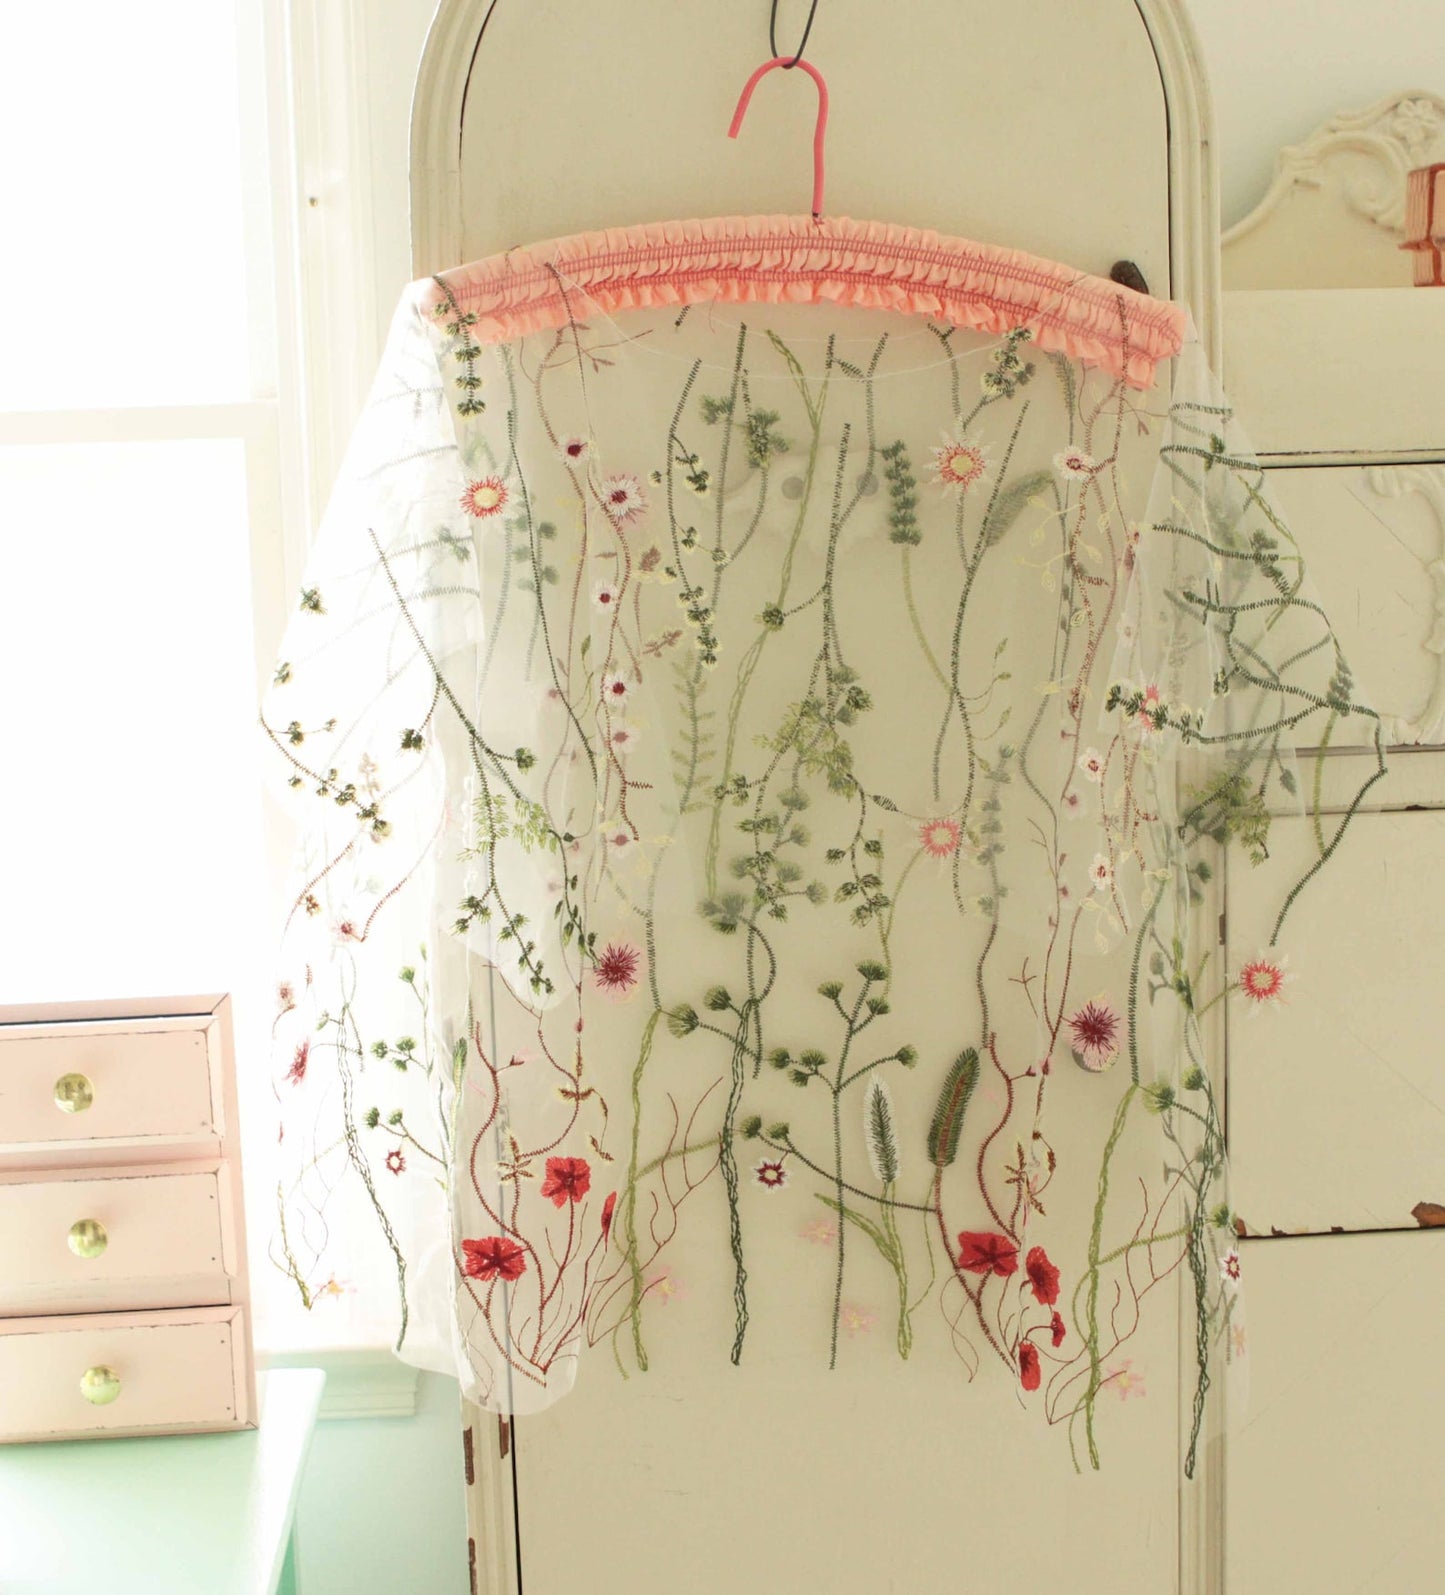 Wildflower embroidered bridal capelet